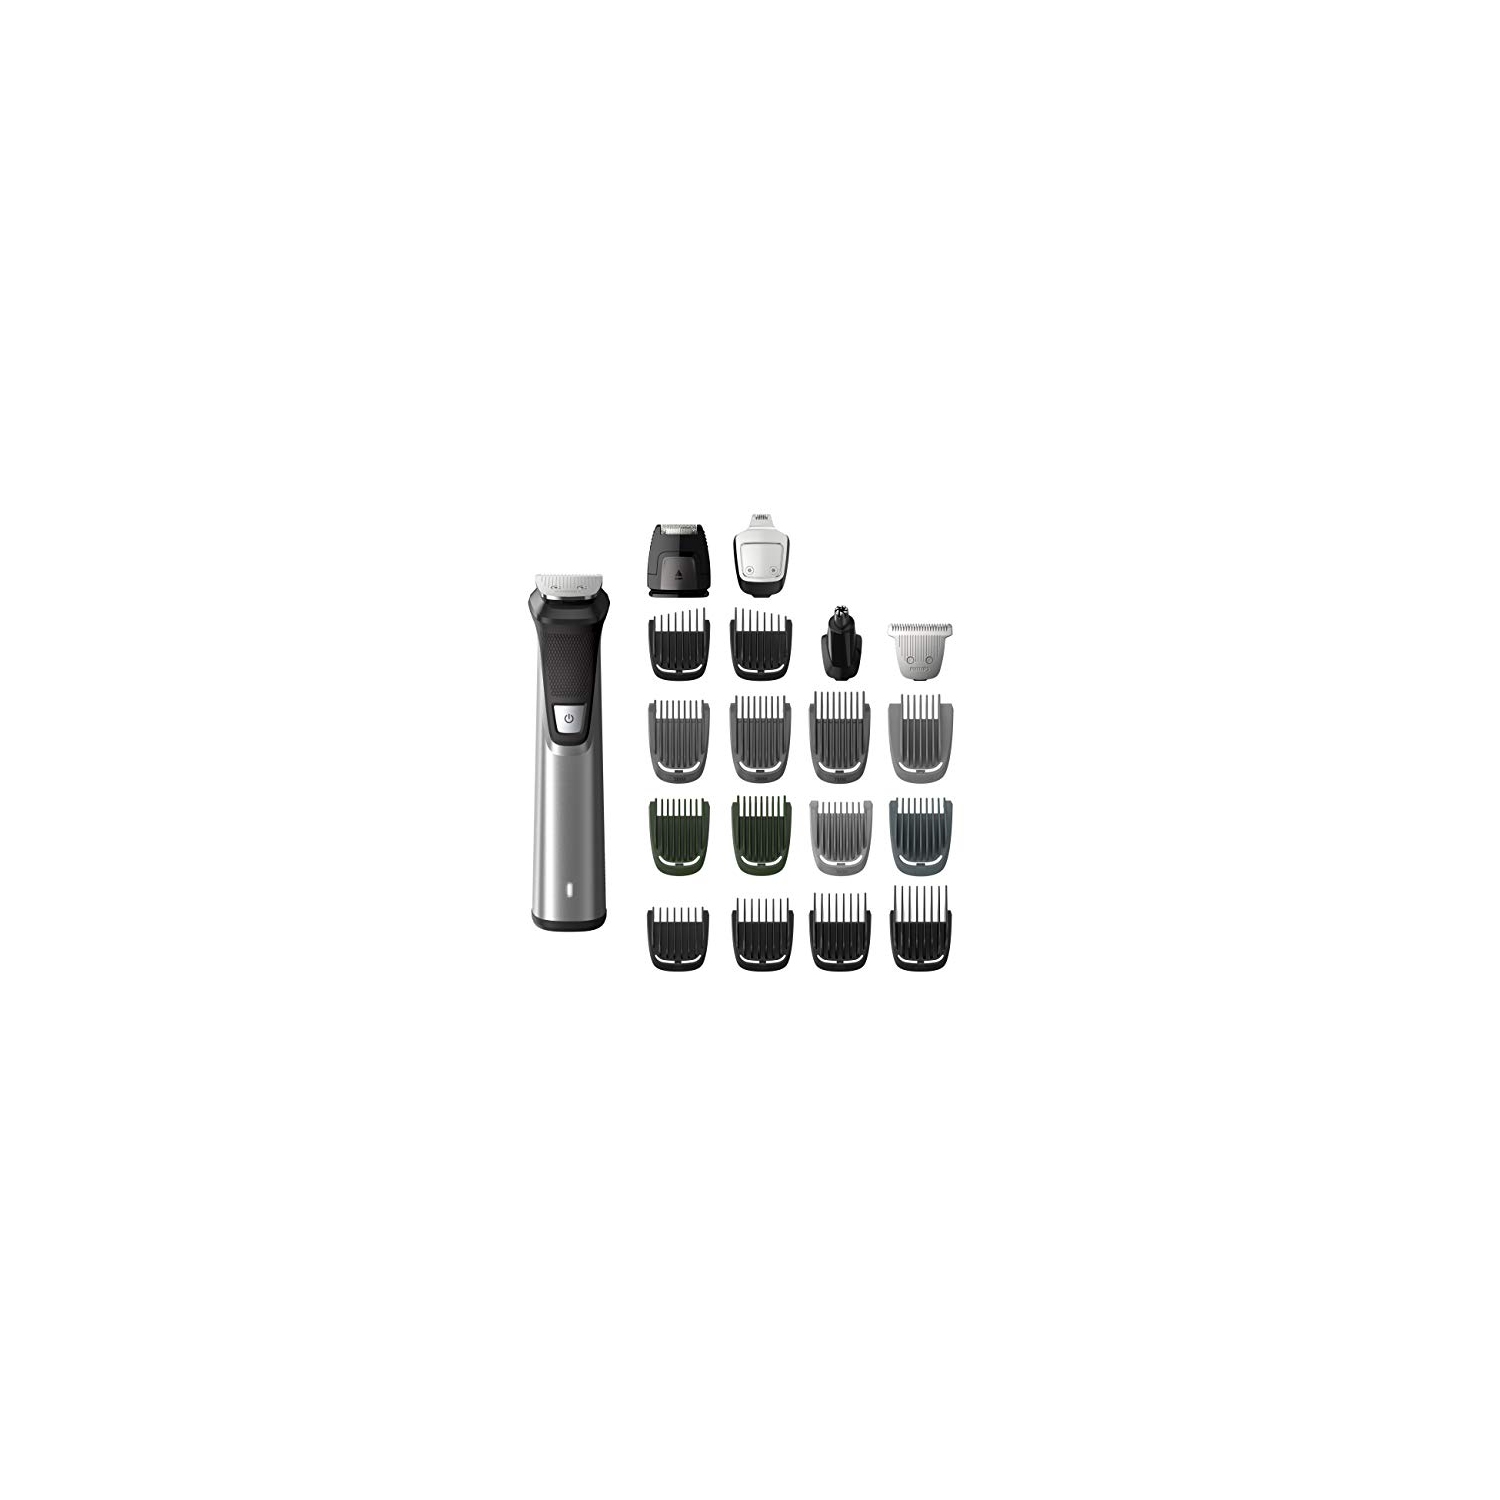 Philips Norelco MG7750/49 Multigroom 7000 Face Styler and Grooming Kit, 23 Trimming Pieces, DualCut Technology, Fully